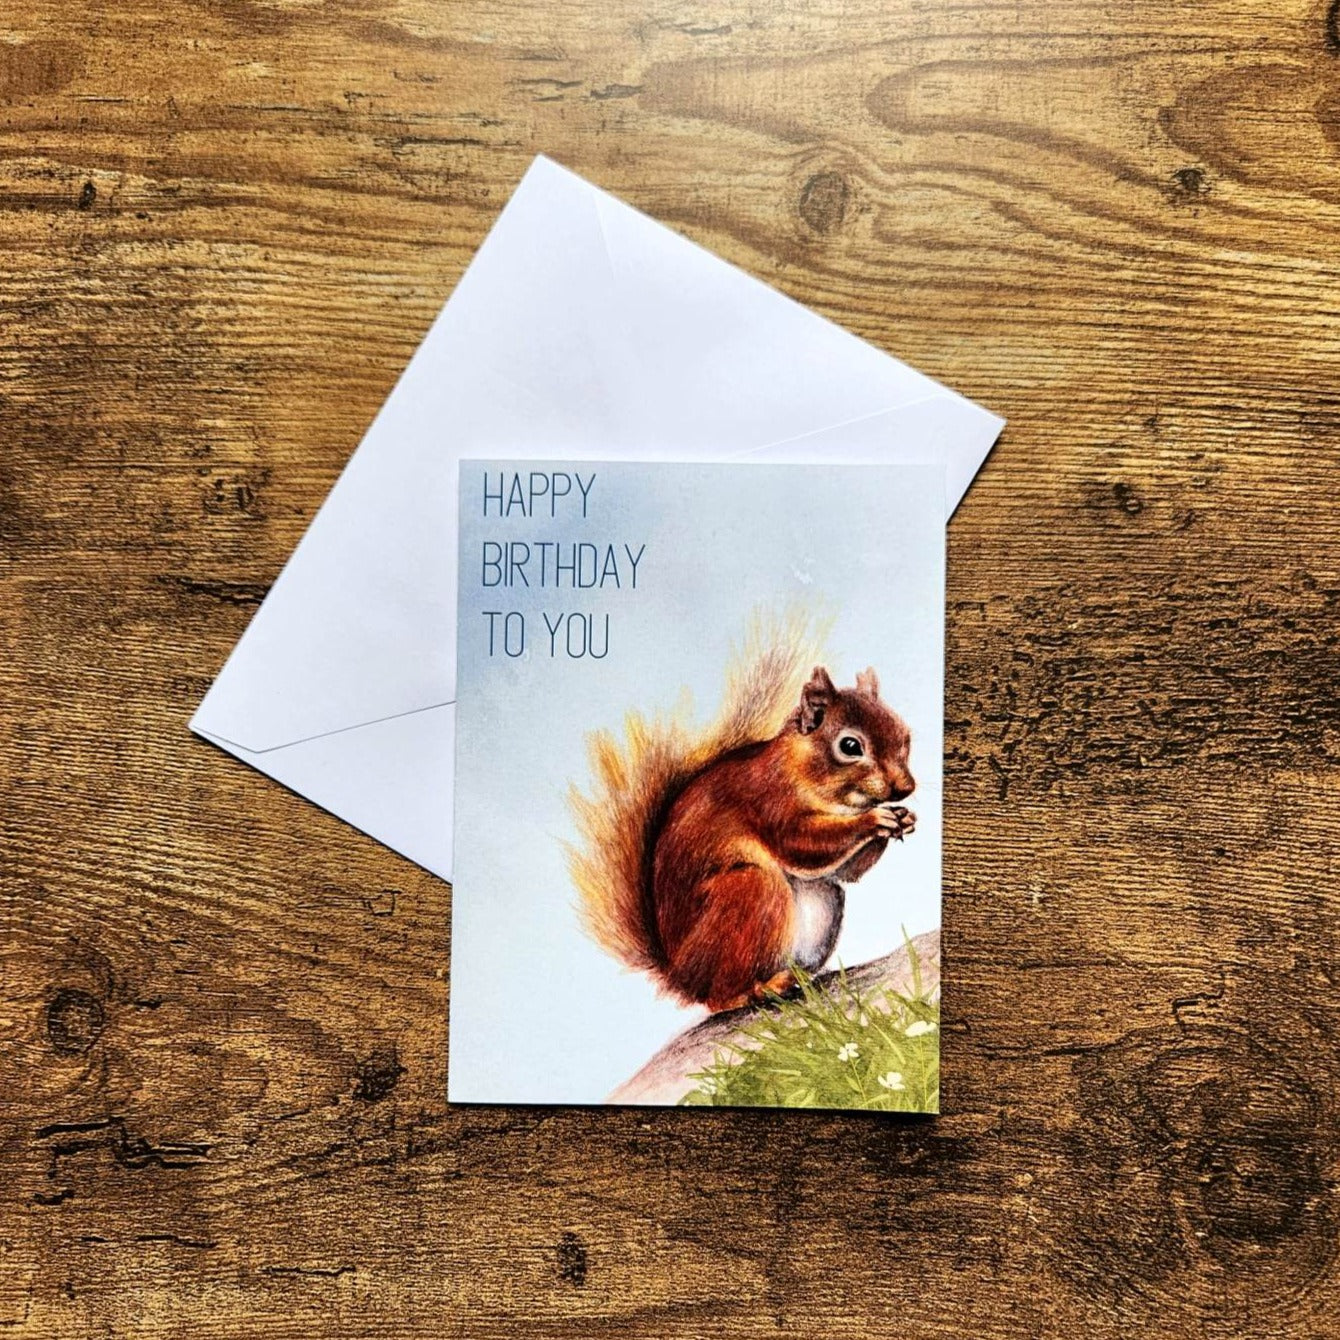 Happy birthday to you, Birthday card, Squirrel greeting card, Squirrel art card, Squirrel lover card, Nature card for husband, Wife, Partner